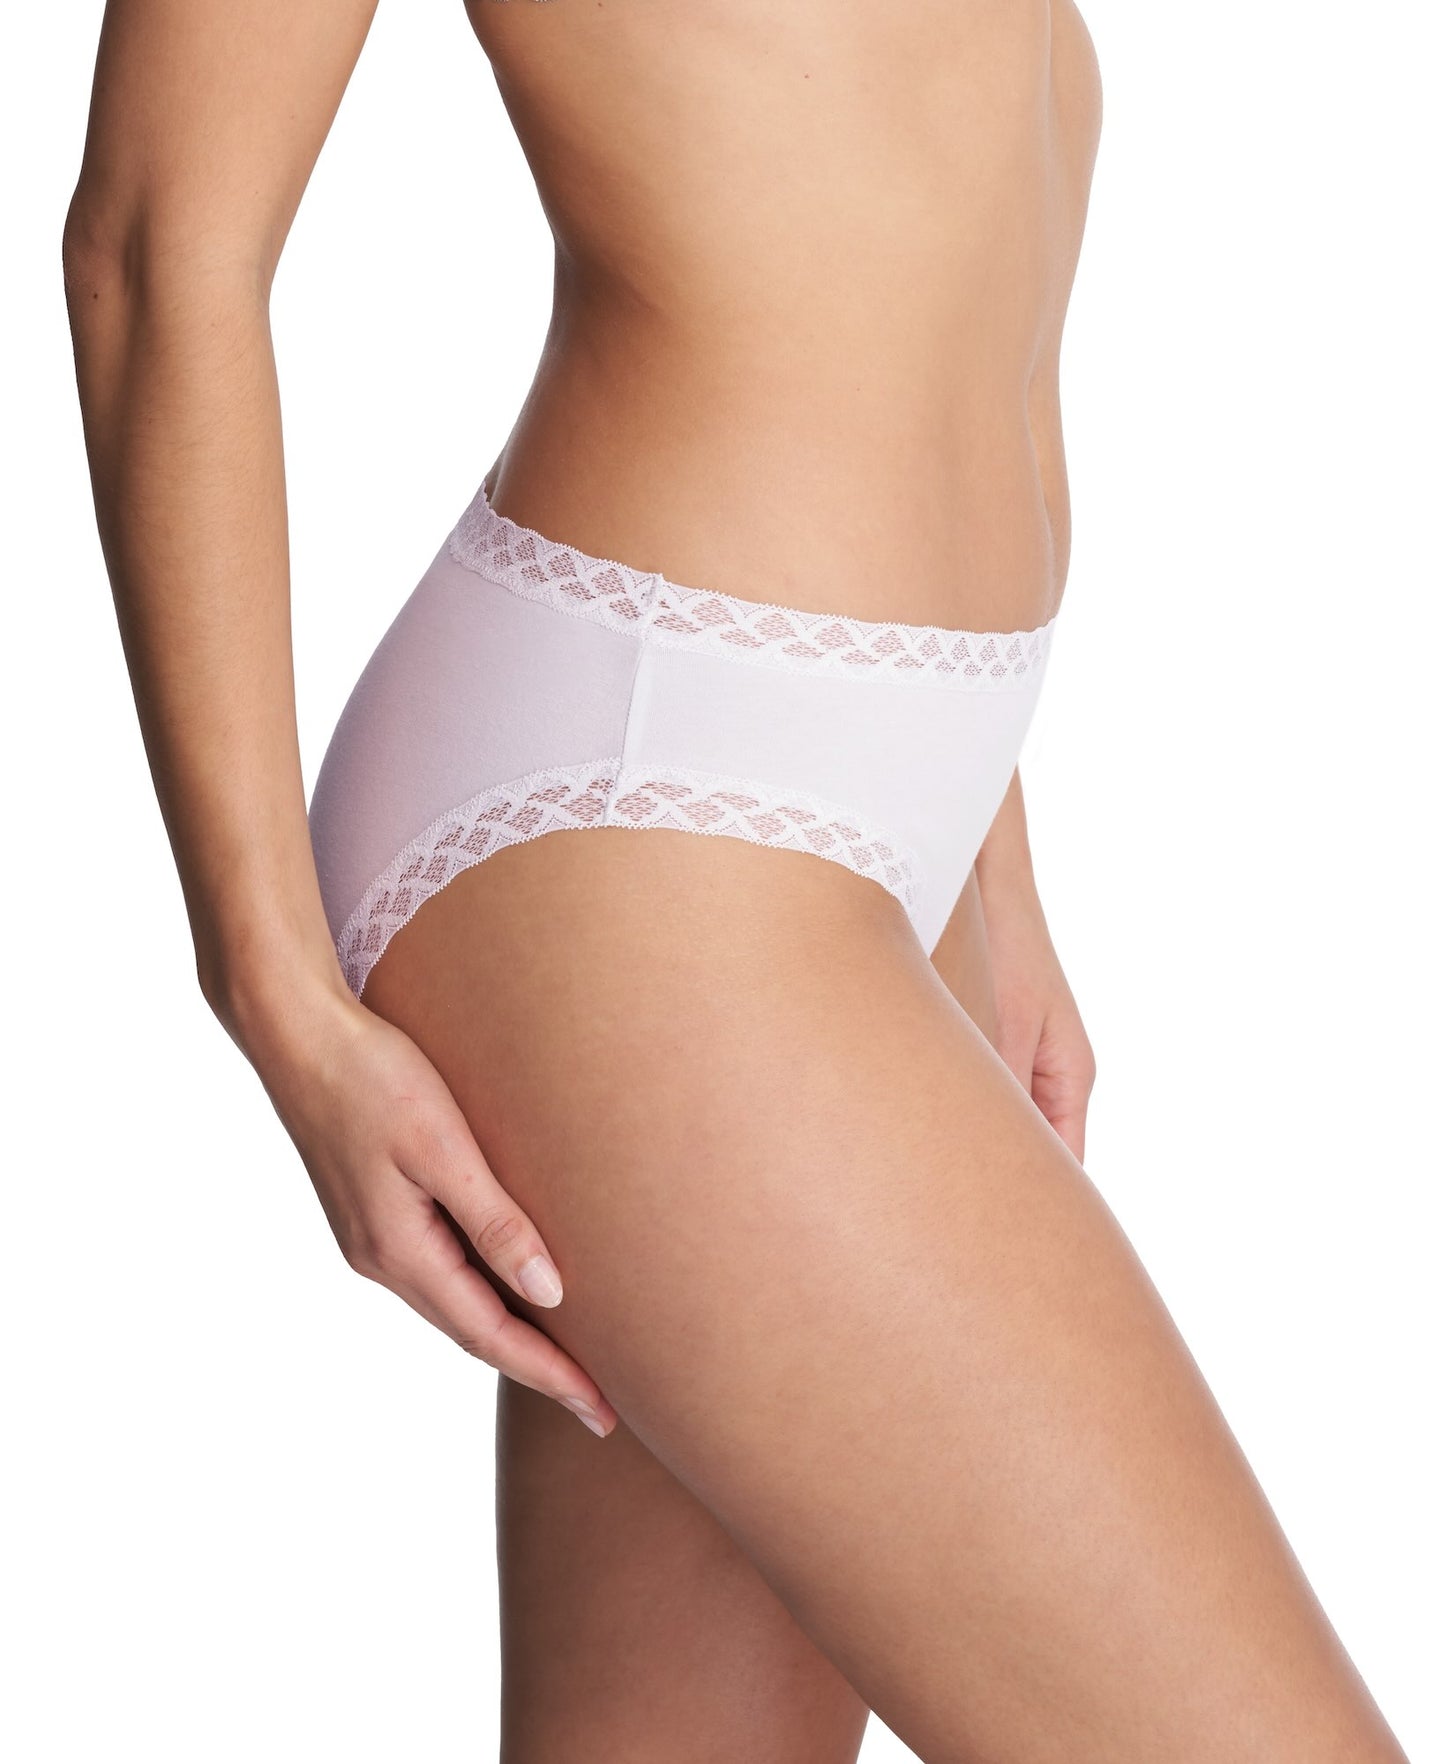 Bliss Girl brief - new spring colors